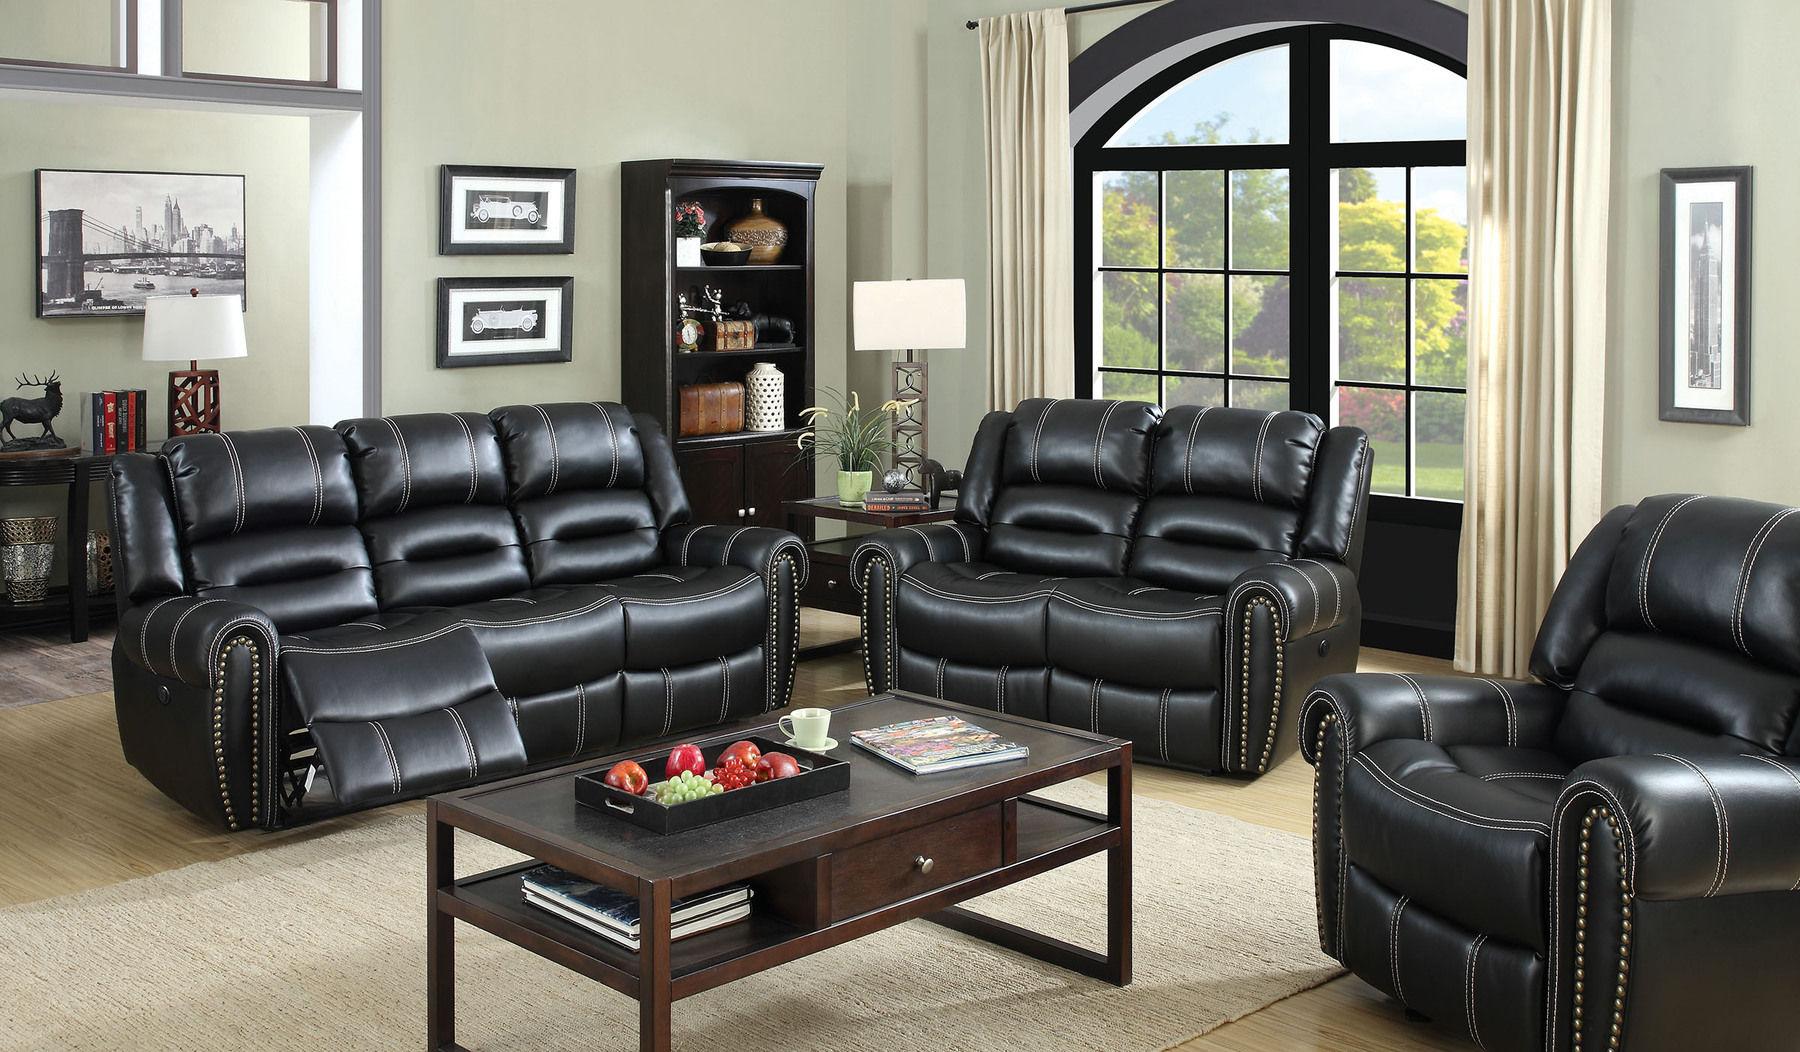 Transitional Recliner Sofa Loveseat and Chair CM6130-3PC Frederick CM6130-3PC in Black 